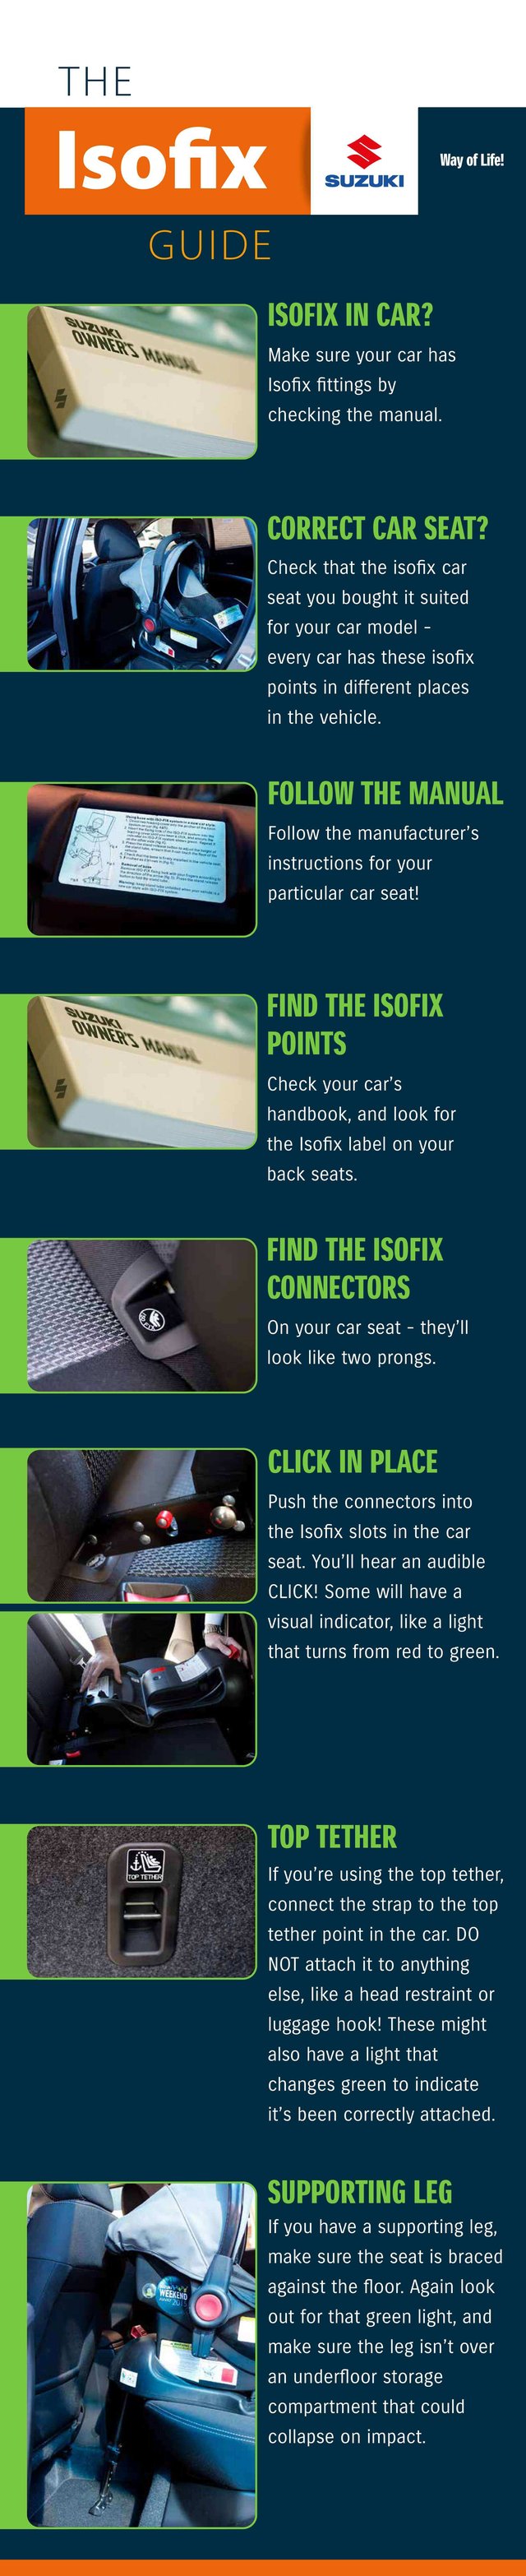 Install an isofix car seat | Infographic